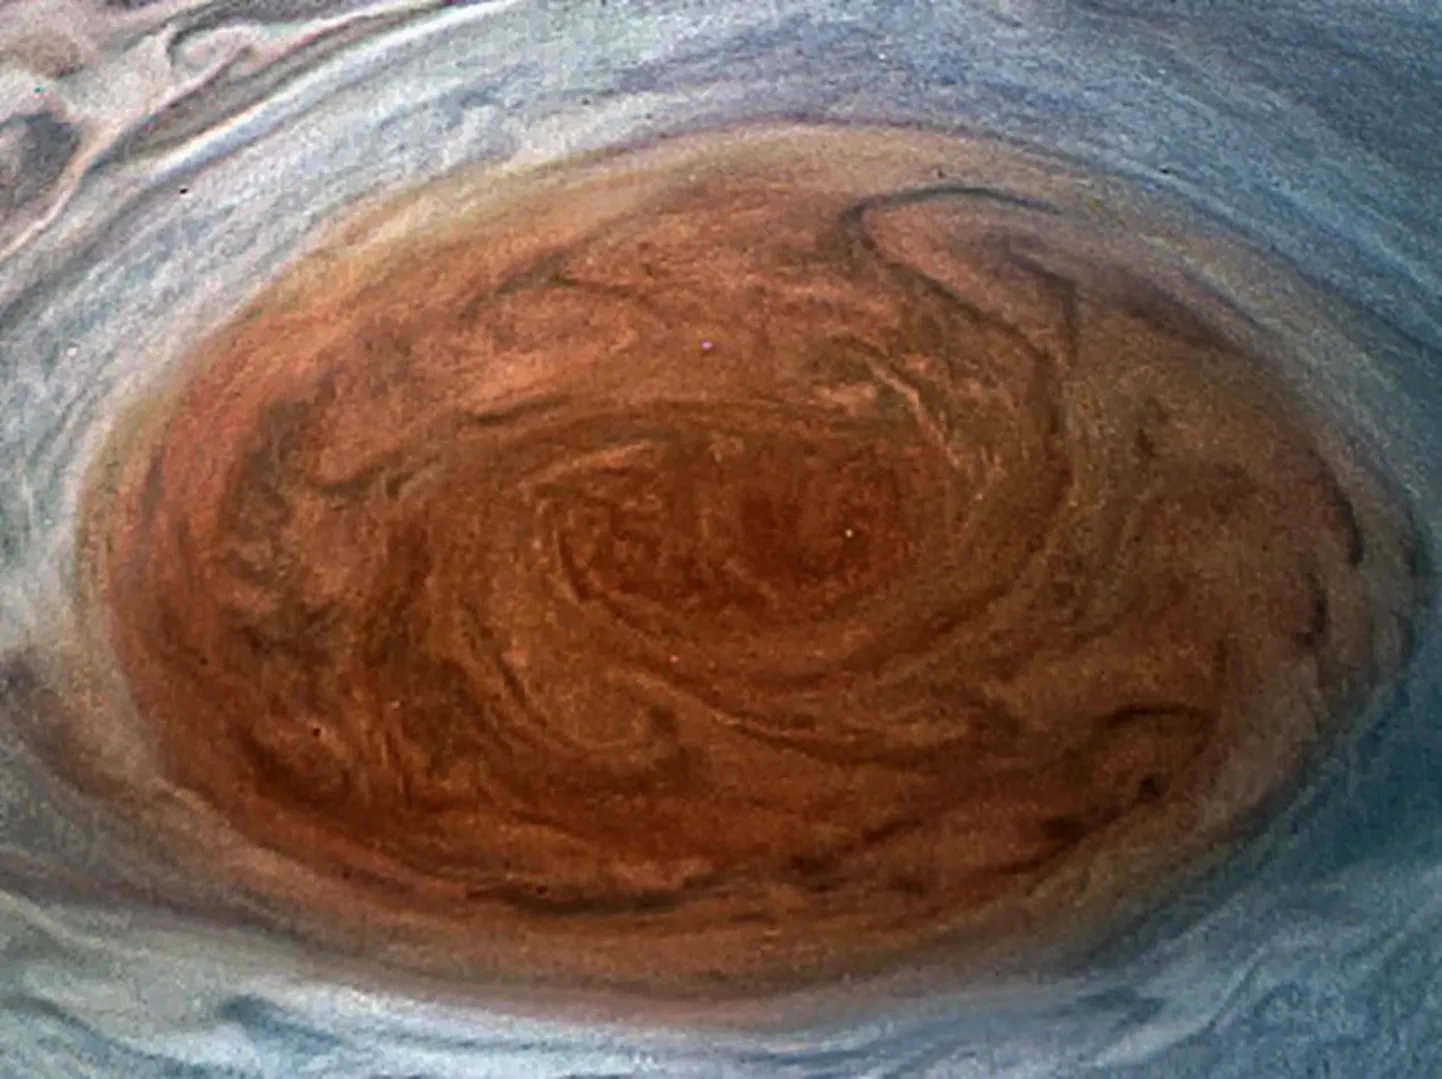 This NASA handout image obtained July 12, 2017 shows the Great Red Spot on Jupiter taken by the Juno Spacecraft on its flyby over the storm on July 11.
NASA's Juno successfully peered into the giant storm raging on Jupiter. "My latest Jupiter flyby is complete!" said a post on the @NASAJuno Twitter account. "All science instruments and JunoCam were operating to collect data." The unmanned spacecraft came closer than any before it to the iconic feature on the solar system's largest planet.
 / AFP PHOTO / NASA / Handout / RESTRICTED TO EDITORIAL USE - MANDATORY CREDIT "AFP PHOTO /NASA/SWRI/MSSS" - NO MARKETING NO ADVERTISING CAMPAIGNS - DISTRIBUTED AS A SERVICE TO CLIENTS